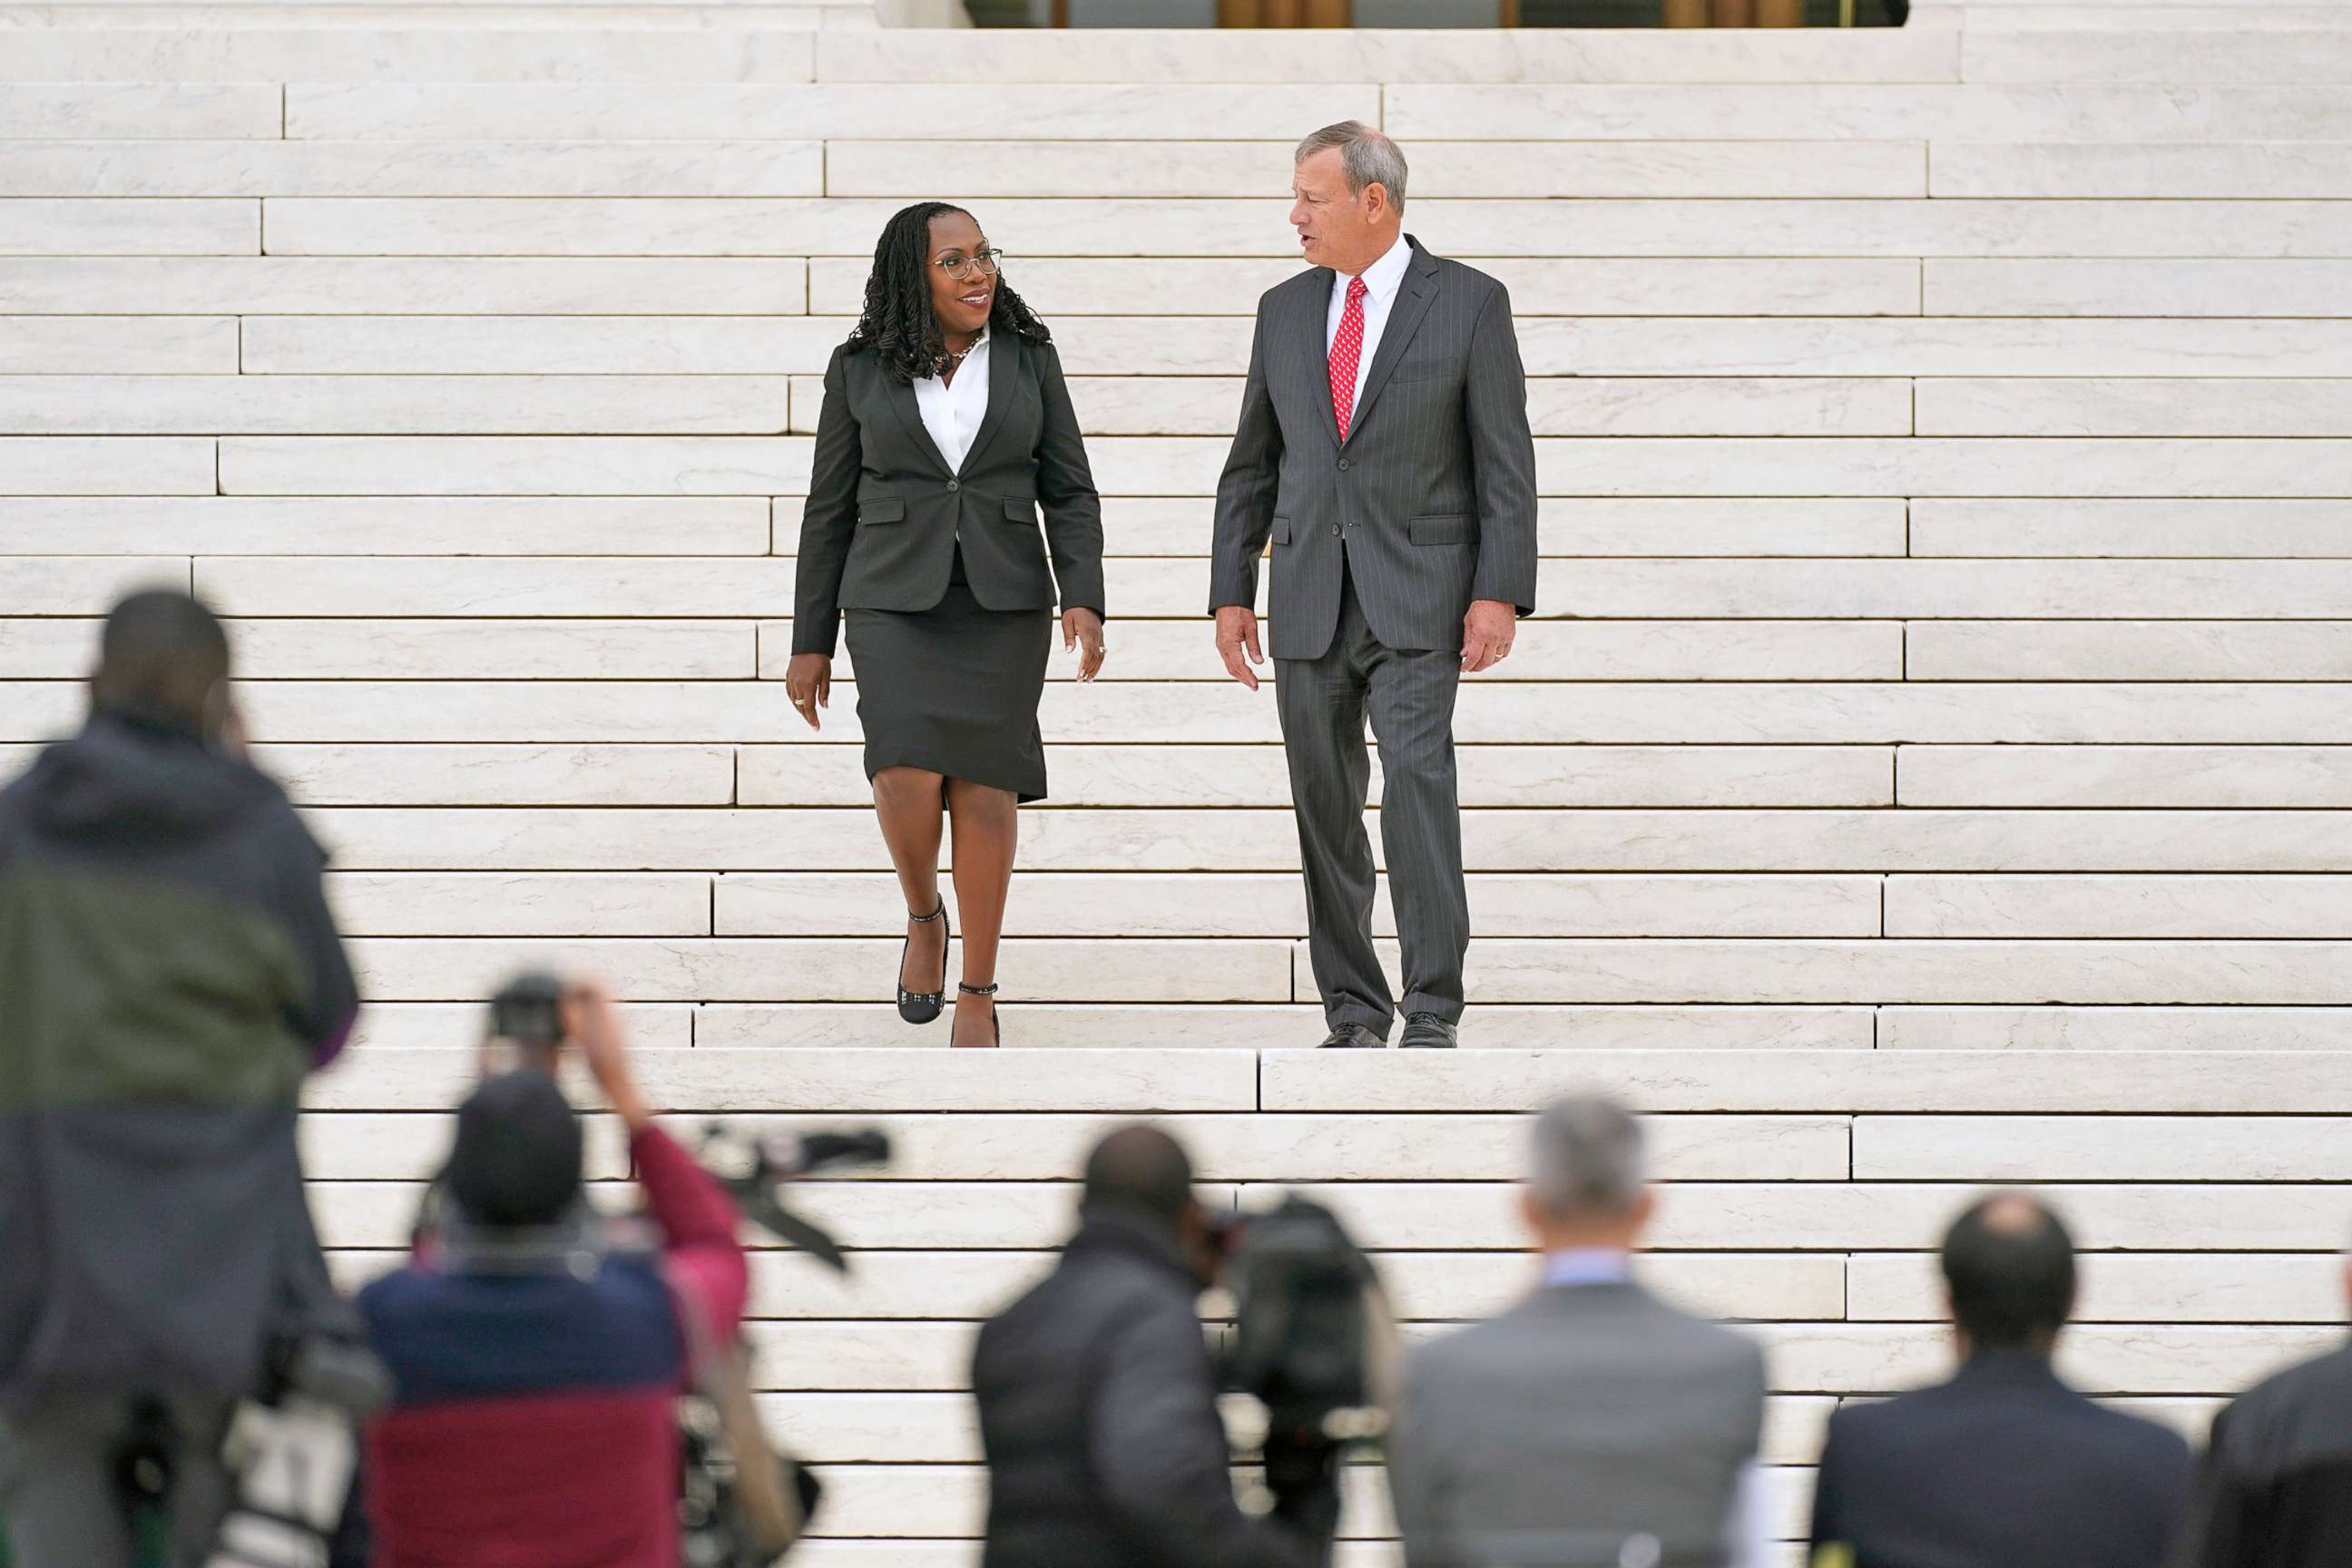 PHOTO: US Supreme Court Justice Ketanji Brown Jackson speaks with Chief Justice John Roberts on the steps of the US Supreme Court, immediately following the investiture ceremony of Justice Jackson, in Washington, D.C, Sept. 30, 2022.